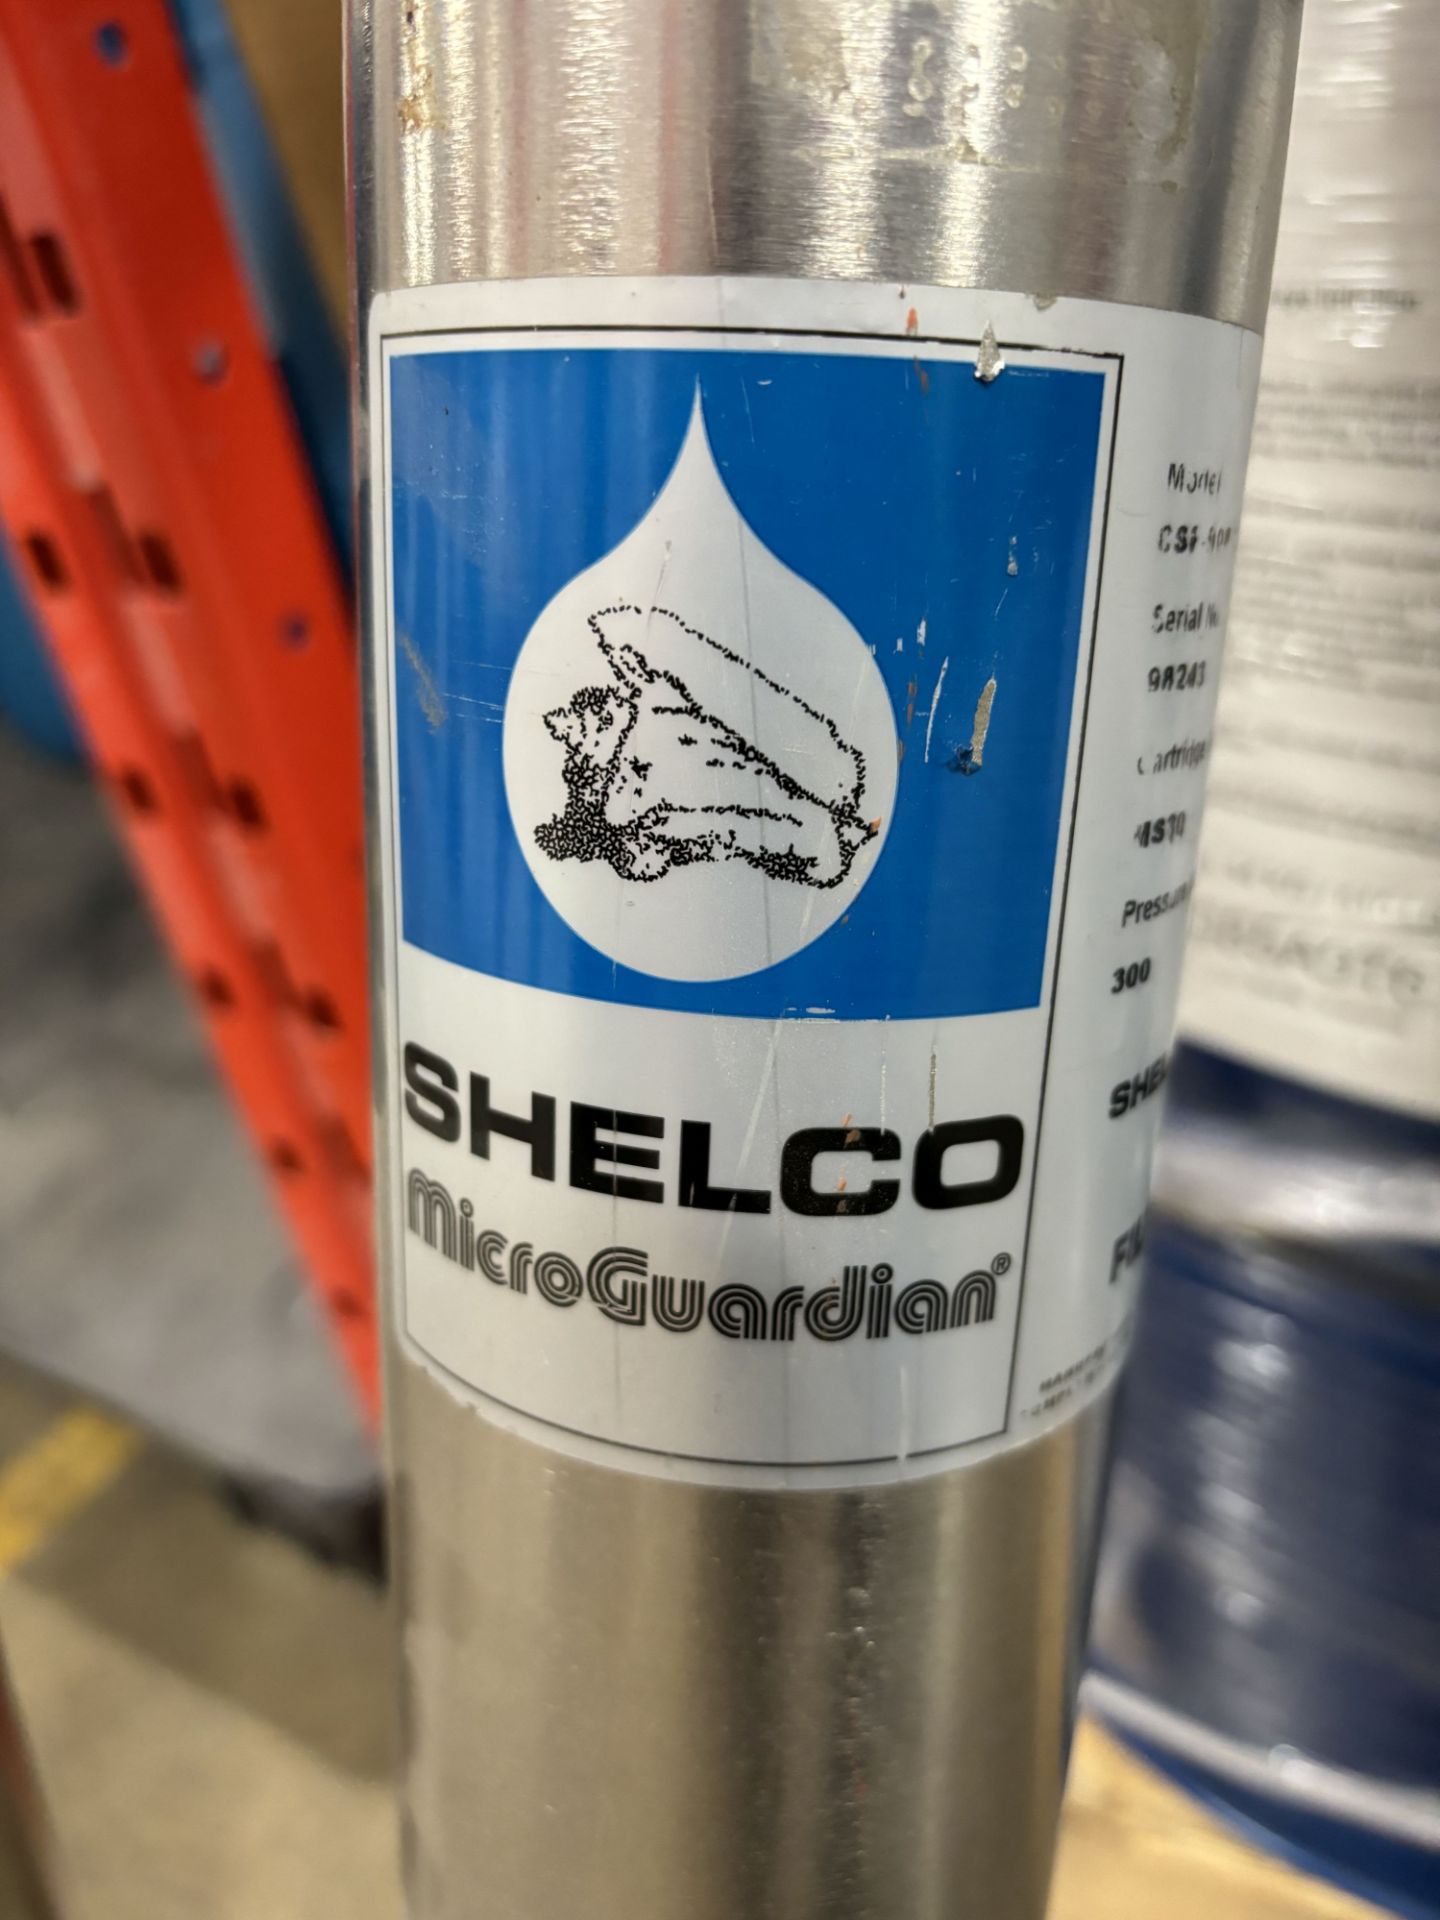 Stainless Steel Shelco Filter - Image 3 of 4